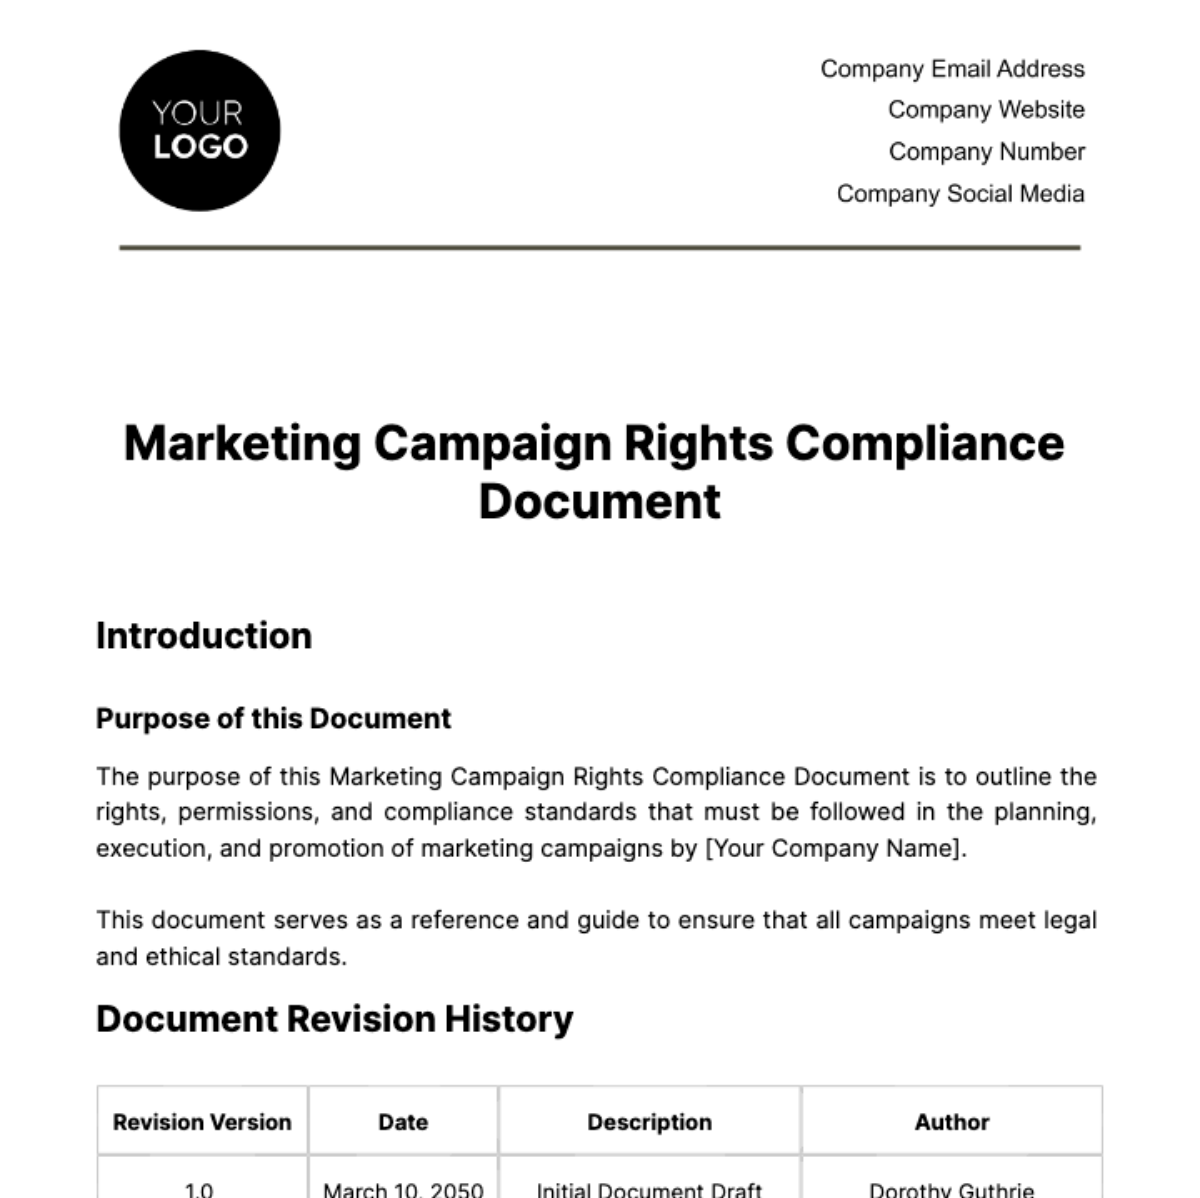 Marketing Campaign Rights Compliance Document Template